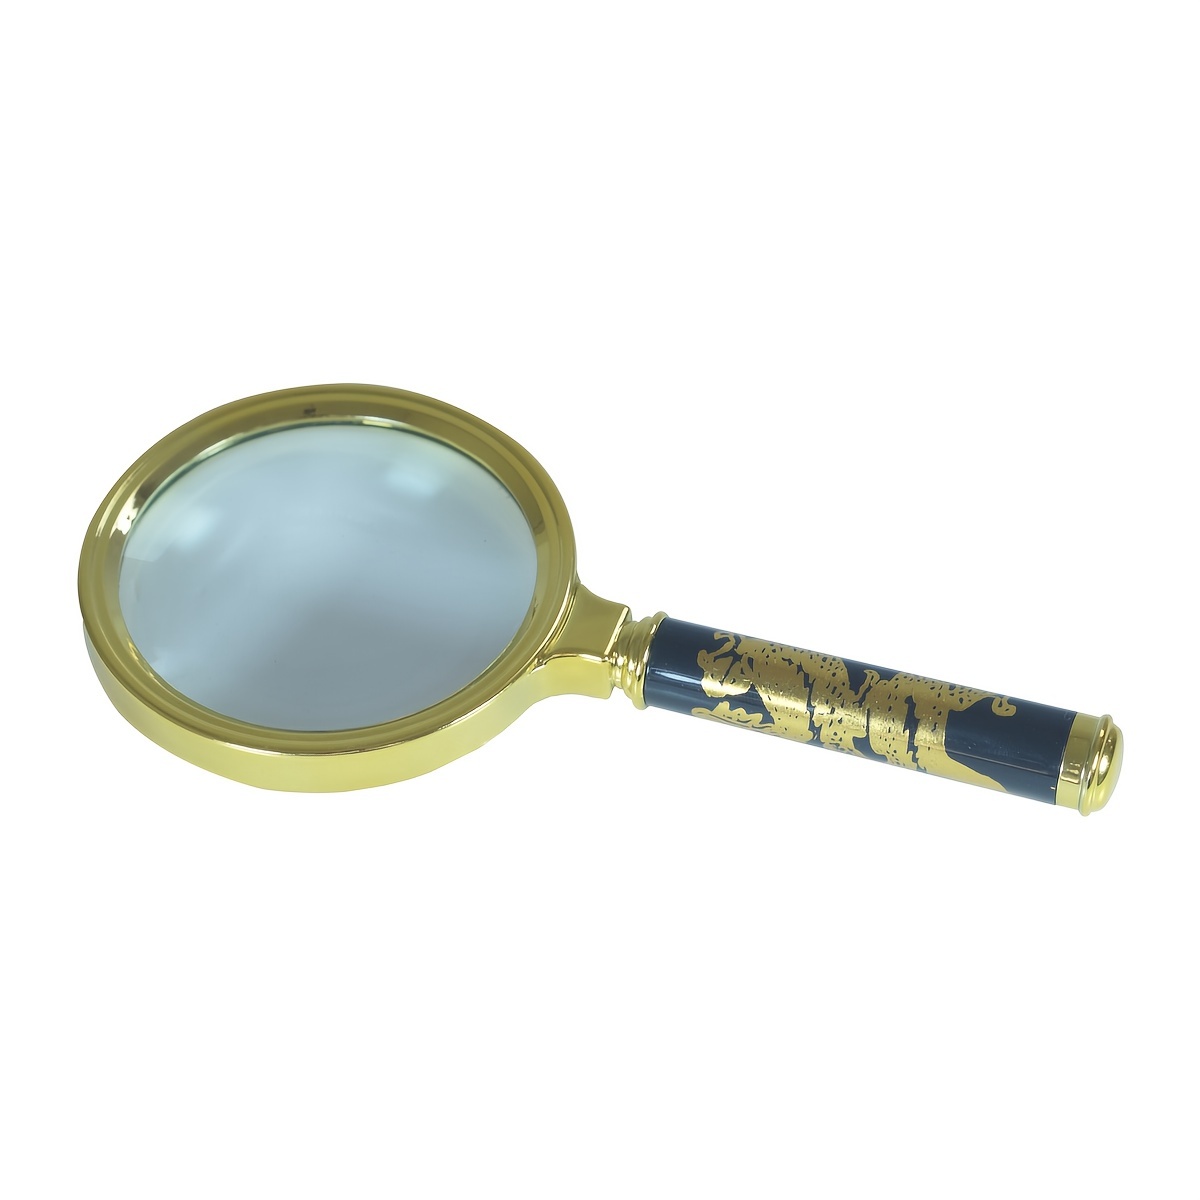 30x Folding Magnifier, Magnifying Glass For Metal Diamond Jewelry